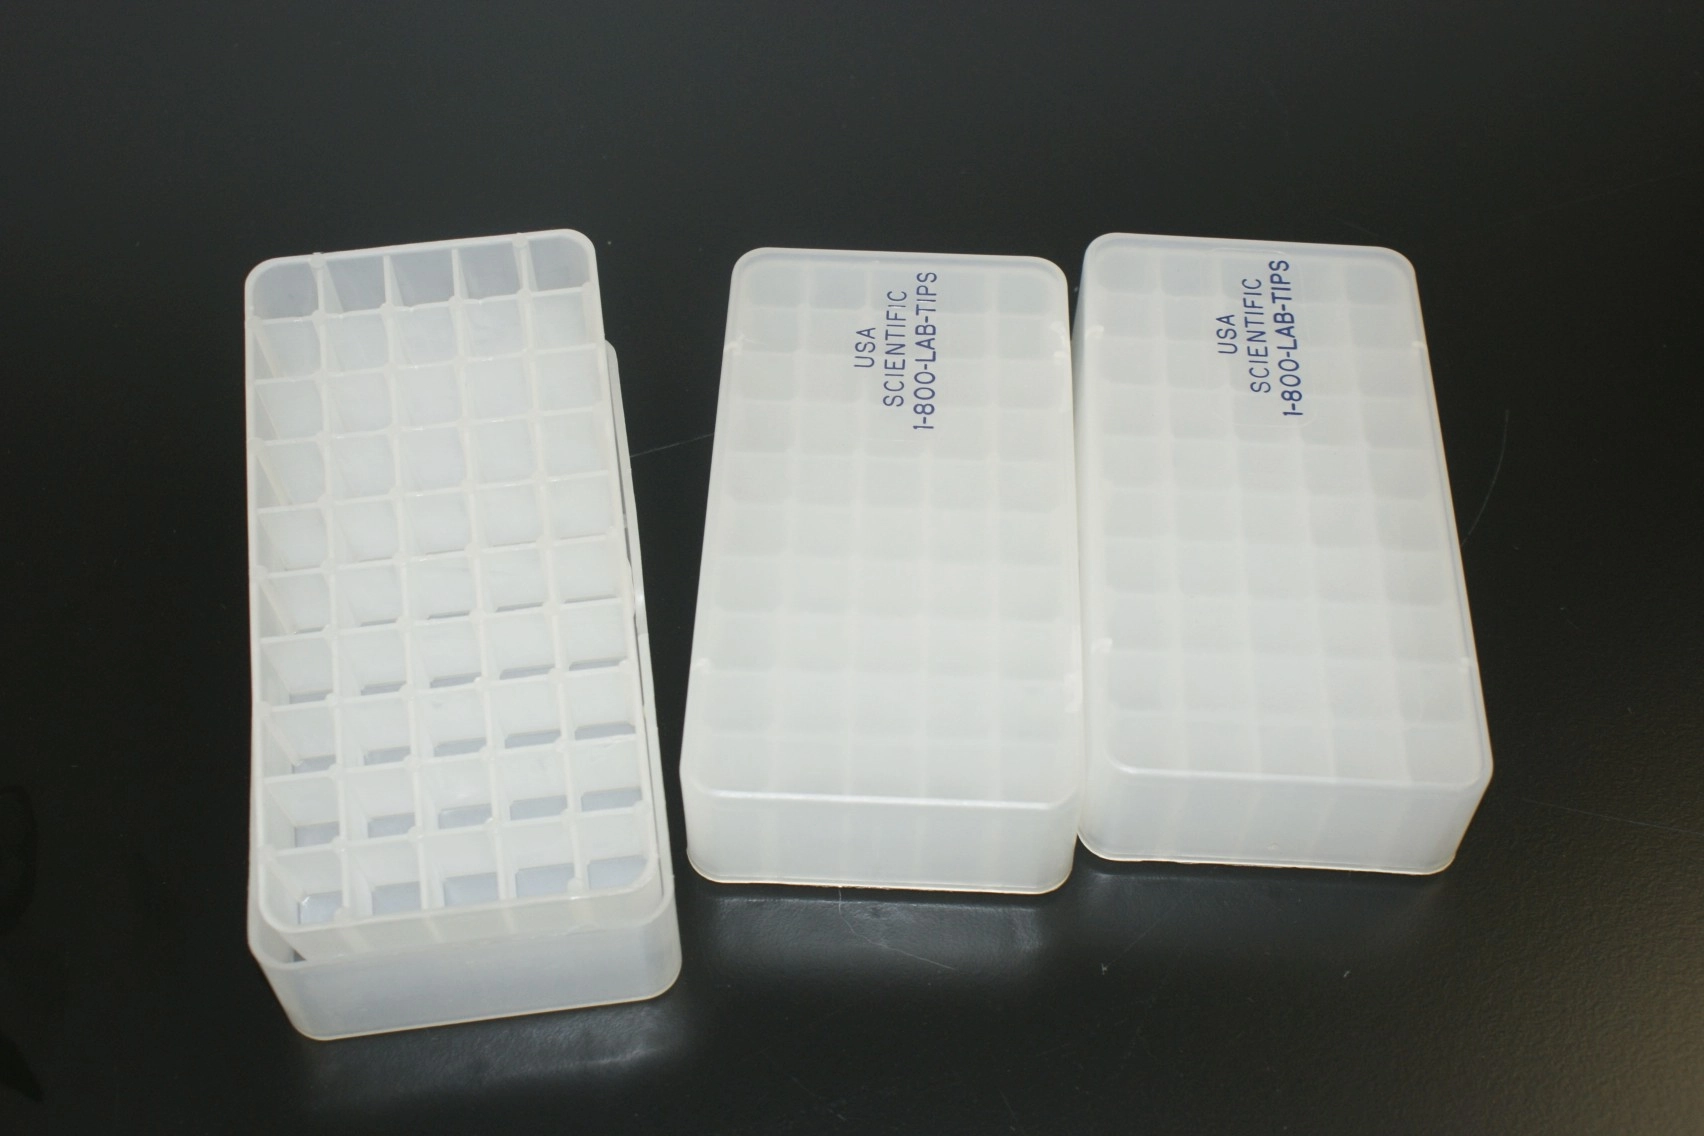 USA PLASTICS Vial Case Plastic USA Plastics 5 x 10 30 cm boxes used very nice we have 70 of these for $ 6- each for $420- for